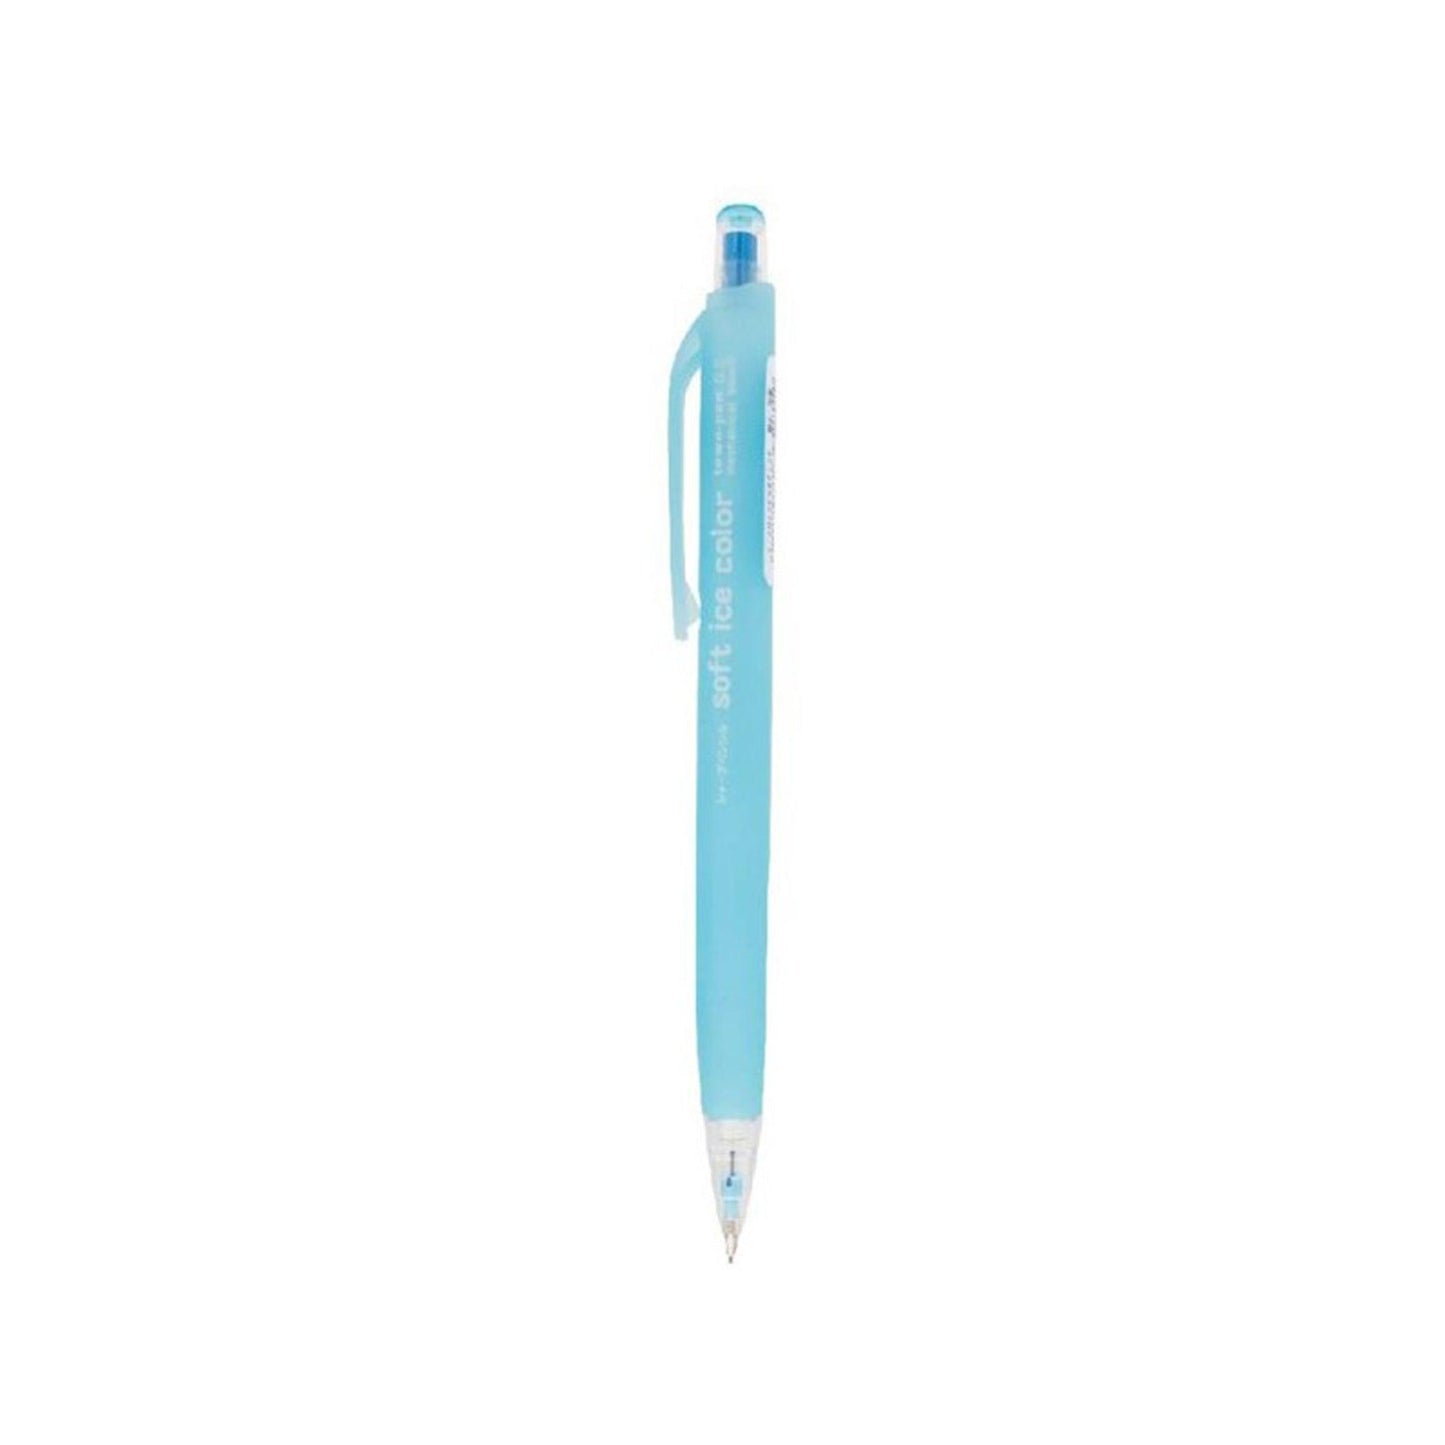 Mechanical Pencil TOWO Triangular Body Candy Color Comfort Grip Student School Office Stationery 0.5mm GL-150 - CHL-STORE 